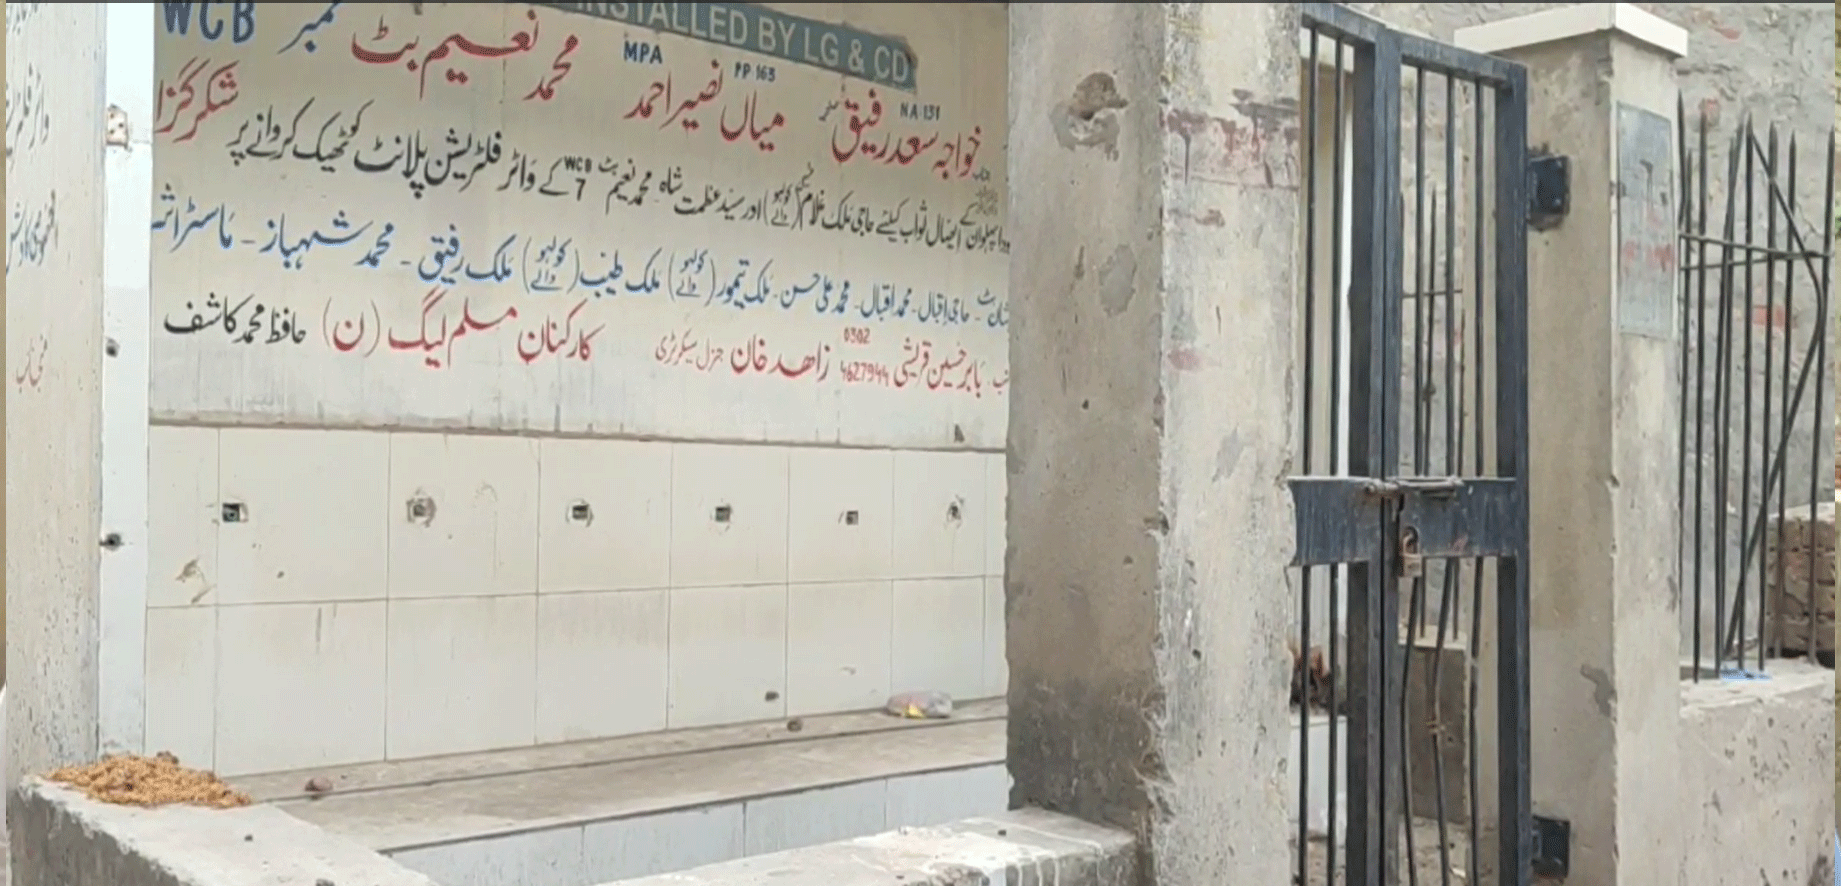 Water Filtration plant , City42, Lahore water crisis